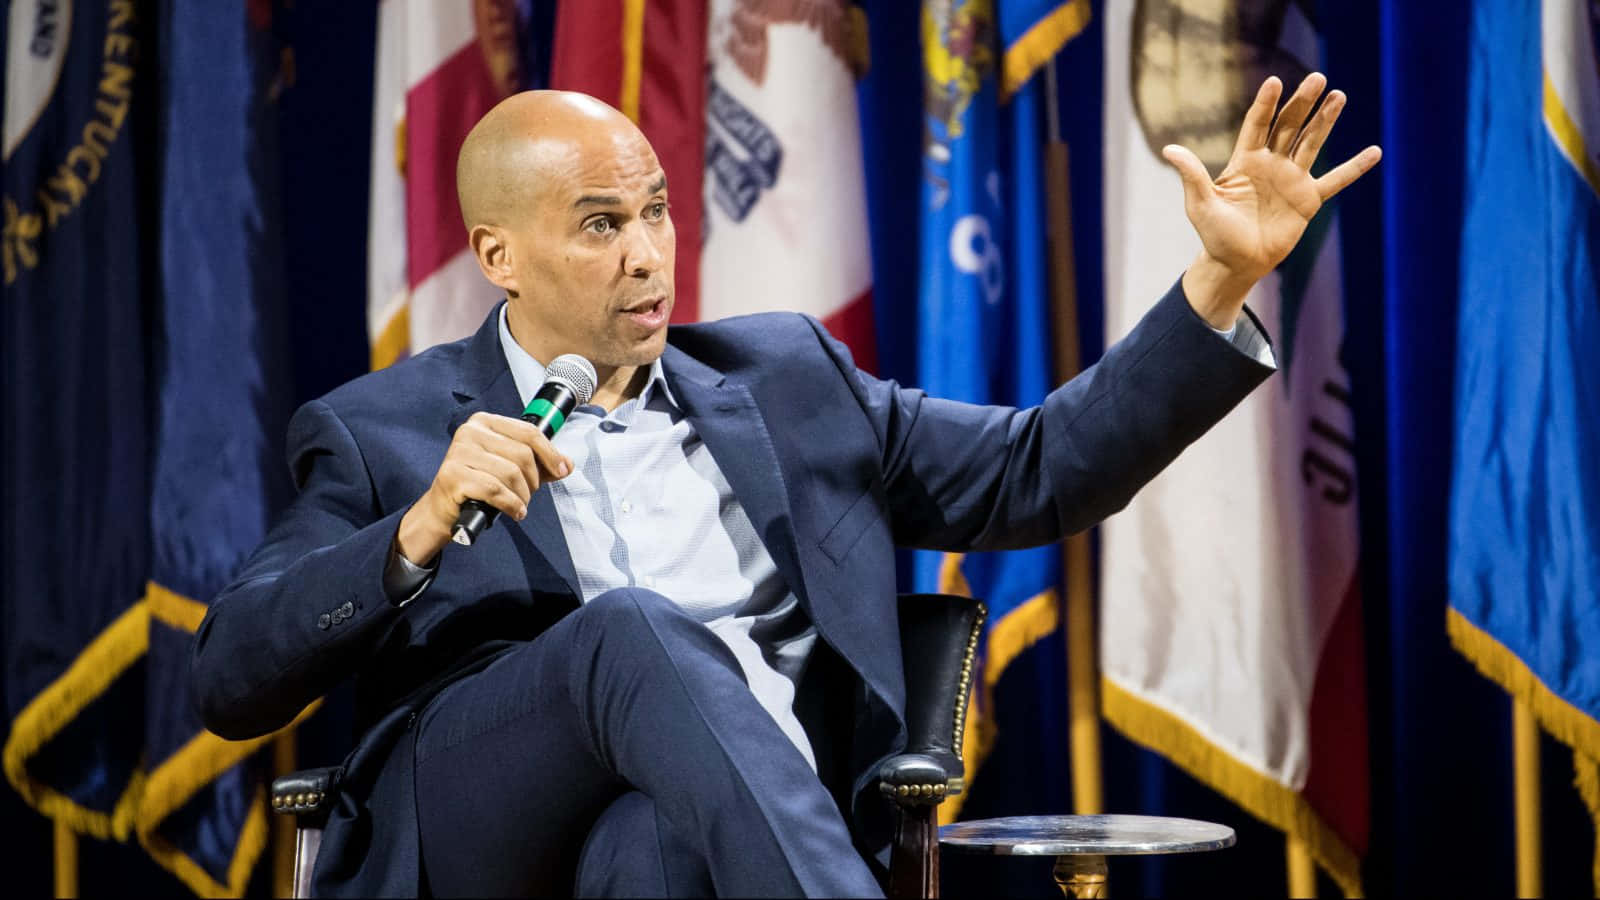 Senator Cory Booker Appearing on a Television Show Wallpaper